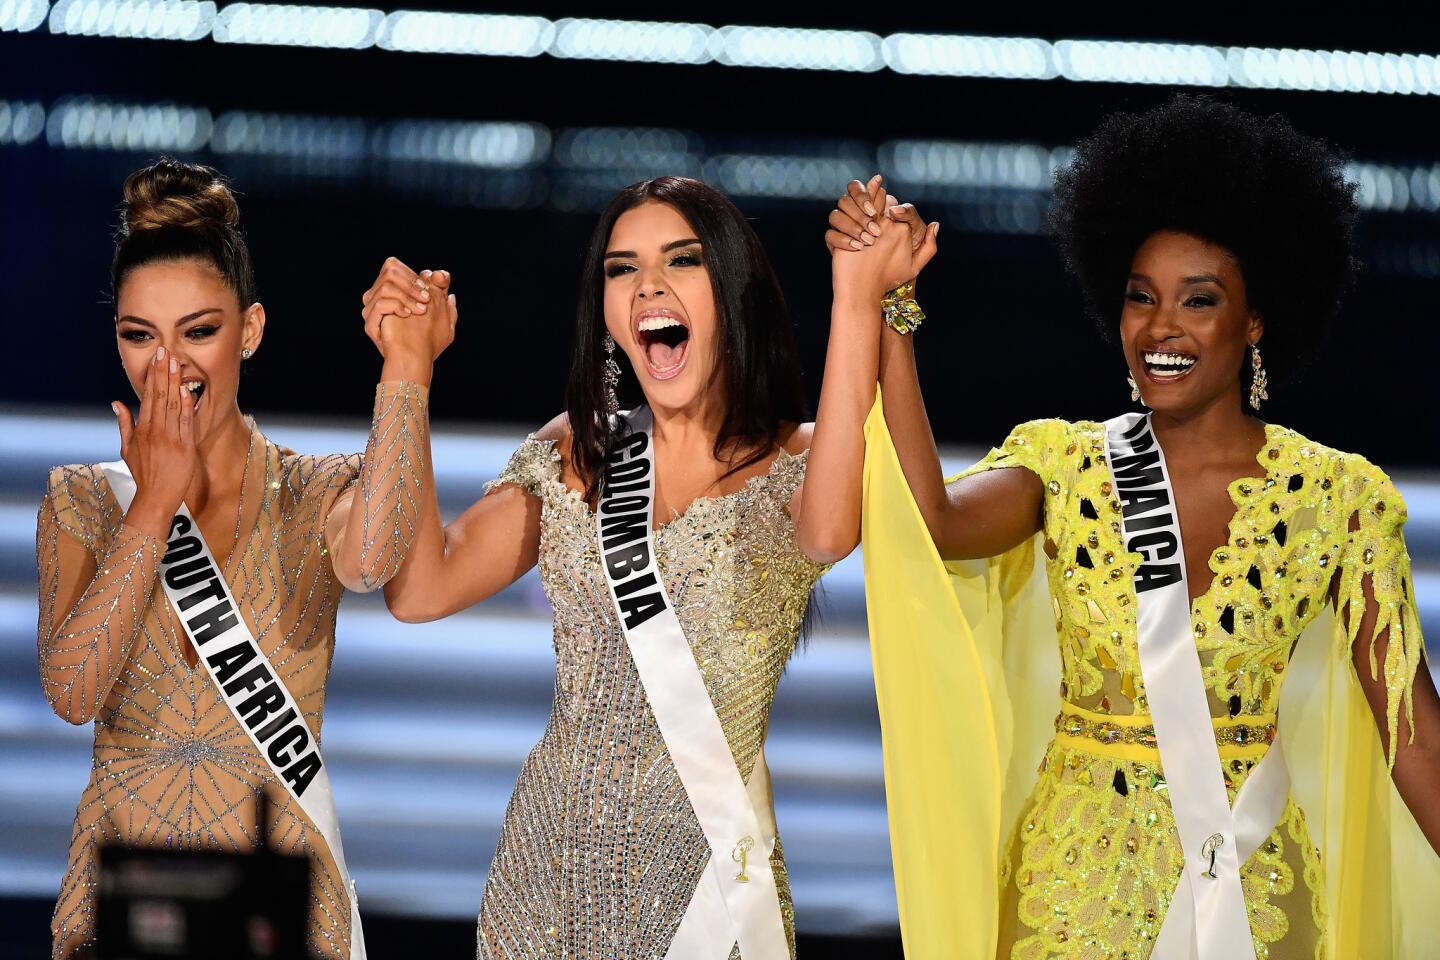 LAS VEGAS, NV - NOVEMBER 26: (L-R) Top 3 finalists Miss South Africa 2017 Demi-Leigh Nel-Peters, Miss Colombia 2017 Laura Gonzalez, and Miss Jamaica 2017 Davina Bennett compete during the 2017 Miss Universe Pageant at The Axis at Planet Hollywood Resort & Casino on November 26, 2017 in Las Vegas, Nevada. (Photo by Frazer Harrison/Getty Images) ** OUTS - ELSENT, FPG, CM - OUTS * NM, PH, VA if sourced by CT, LA or MoD **